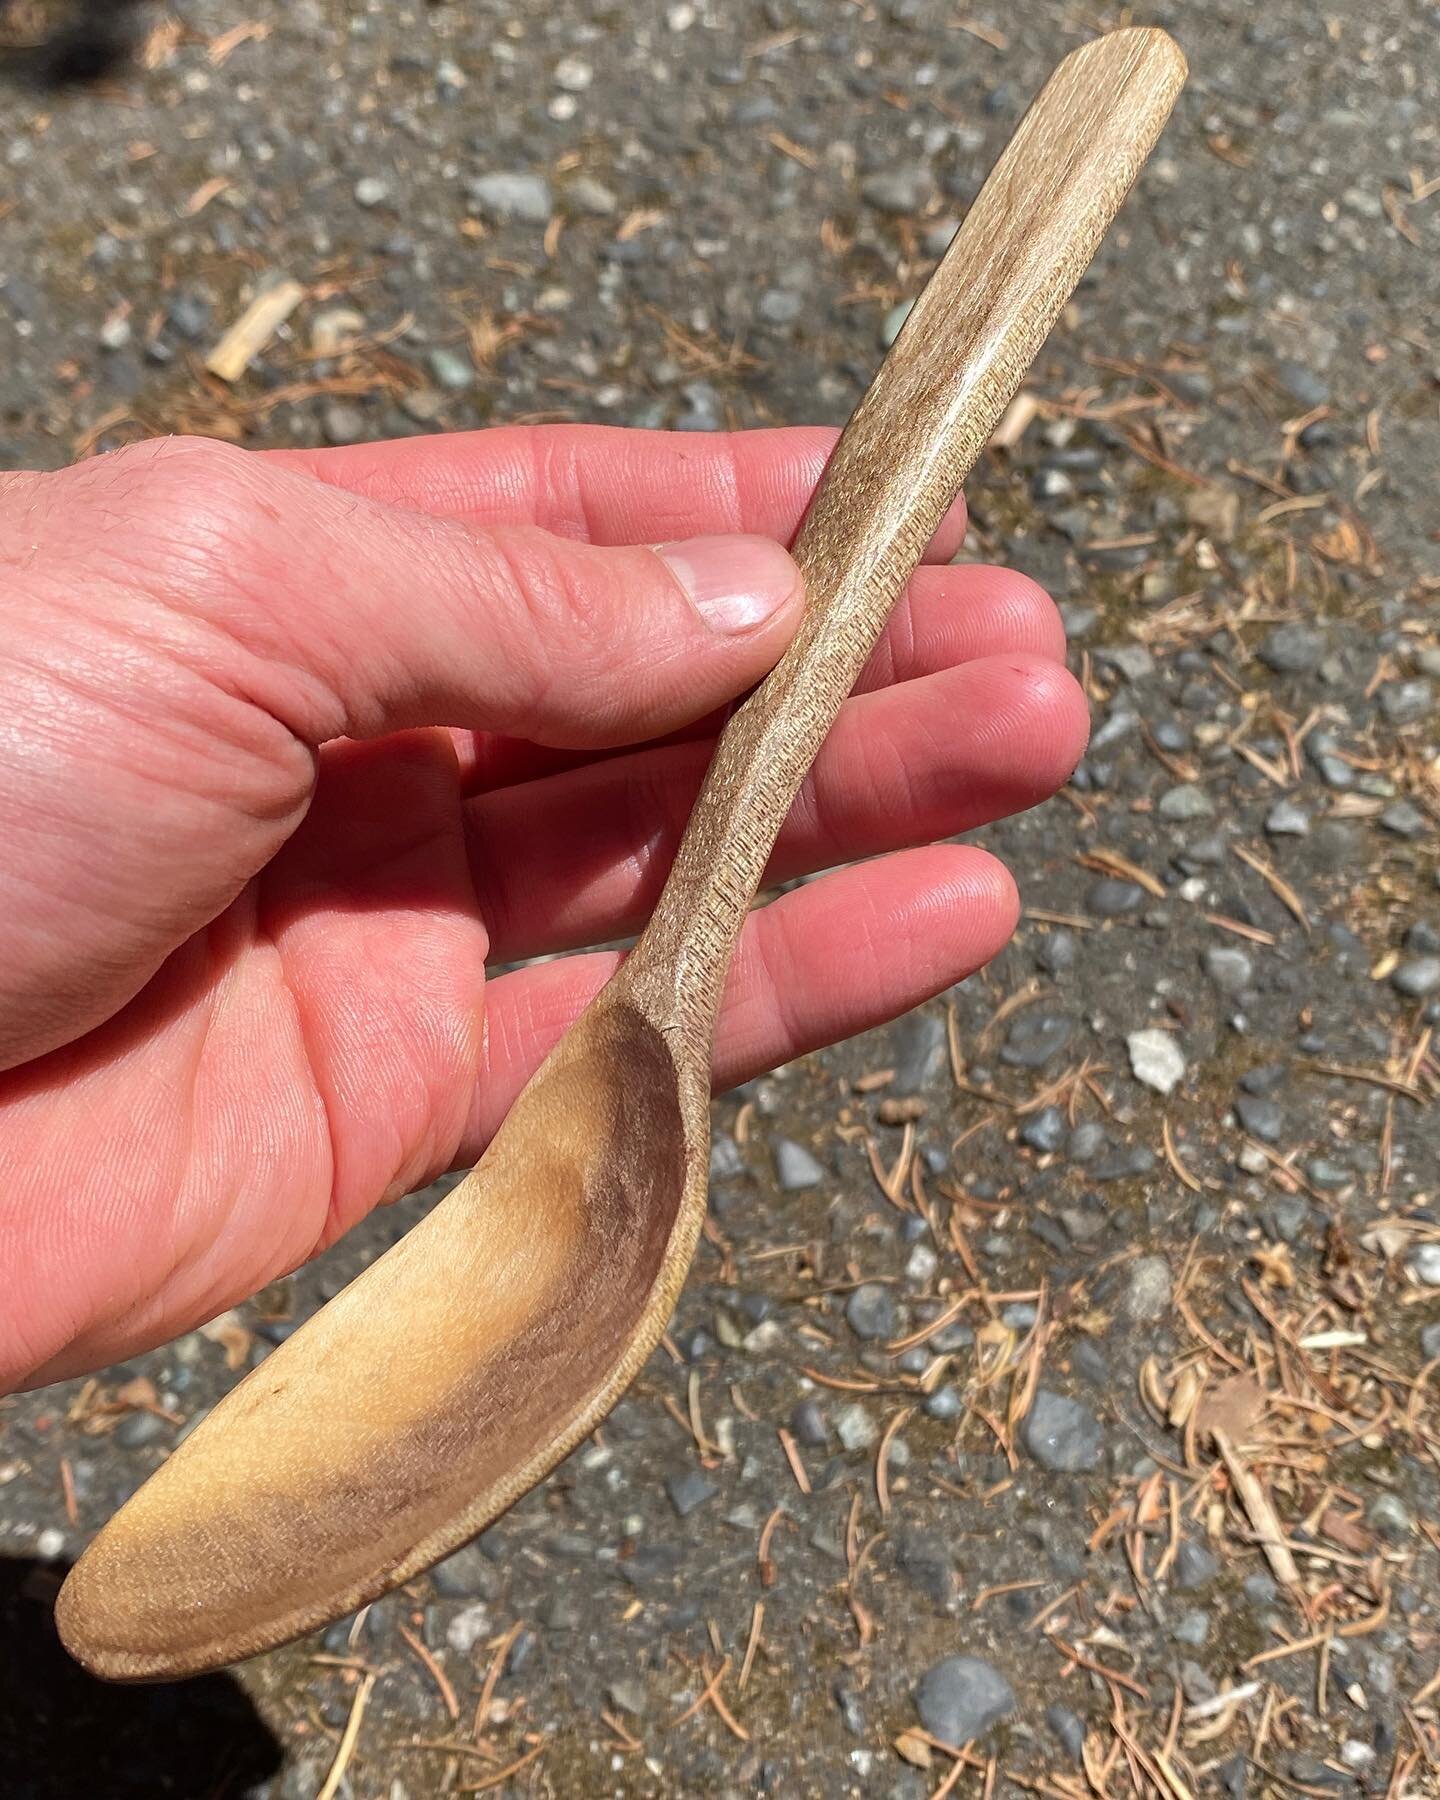 New spoon from black walnut. Lots of interesting colors coming out here! 
.
.
.
.
.
#sloyd #sl&ouml;yd #sloydwoodworking #woodworking #carving #whittling #woodcraft #wildcraft #bushcraft #nature #pnw #bellingham #washington #outdoors #crafting #susta